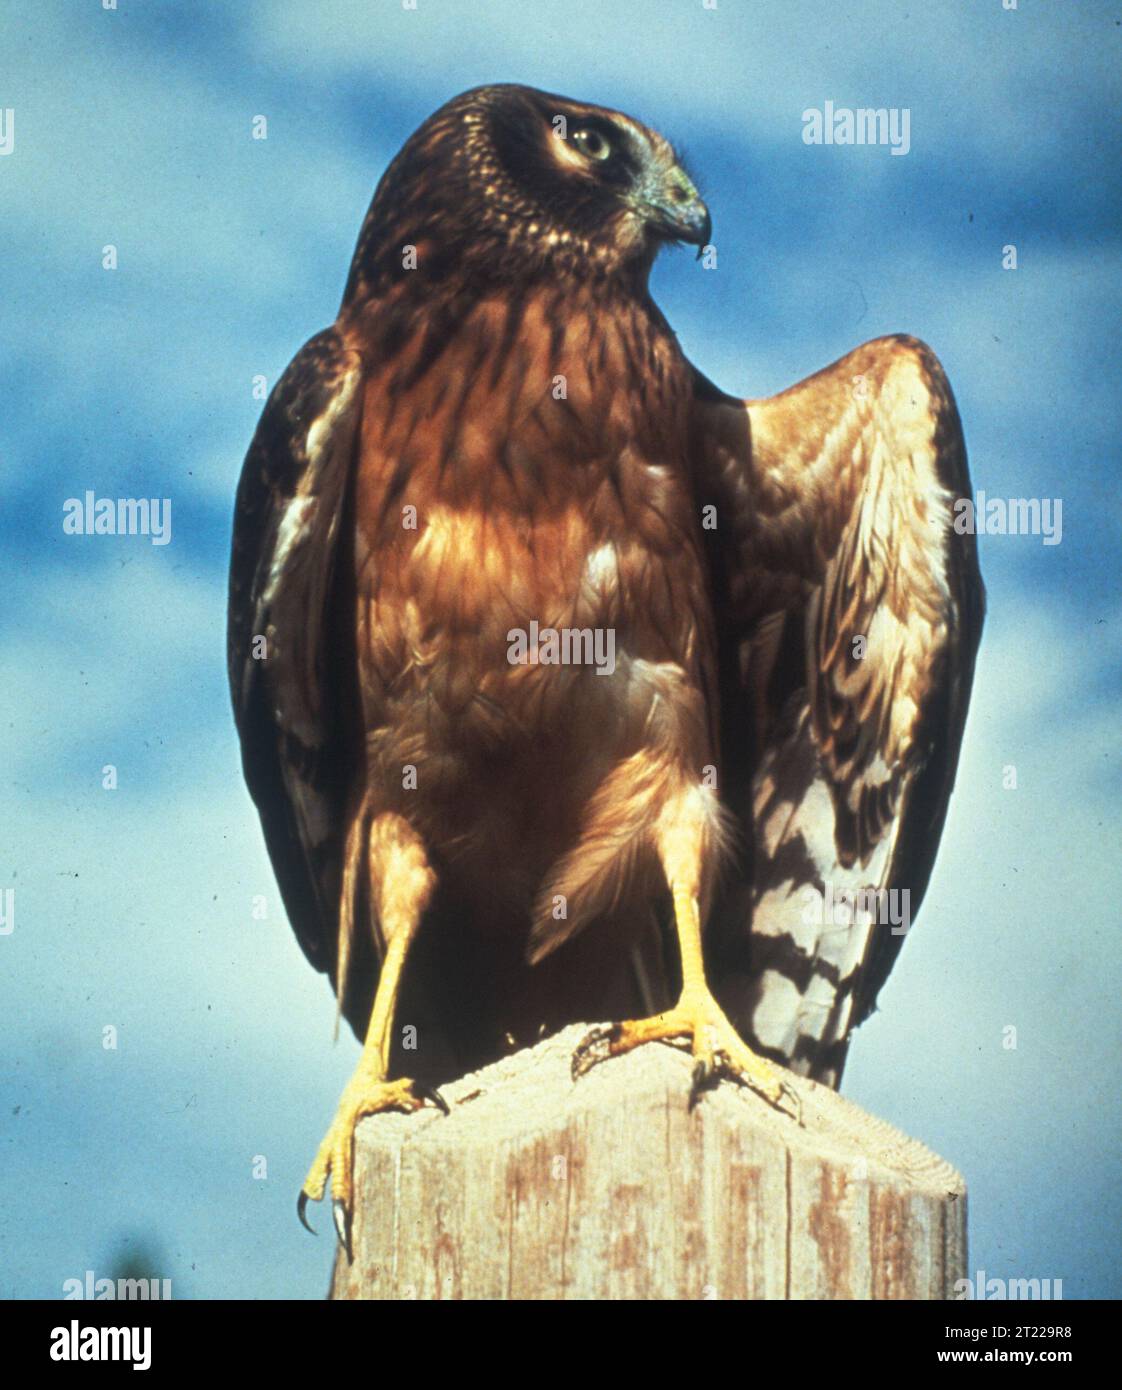 A marsh hawk, known also as a hen harrier, uses an upright log for a perch. Subjects: Birds; Birds of prey. Location: Montana. Fish and Wildlife Service Site: BOWDOIN NATIONAL WILDLIFE REFUGE.  . 1998 - 2011. Stock Photo